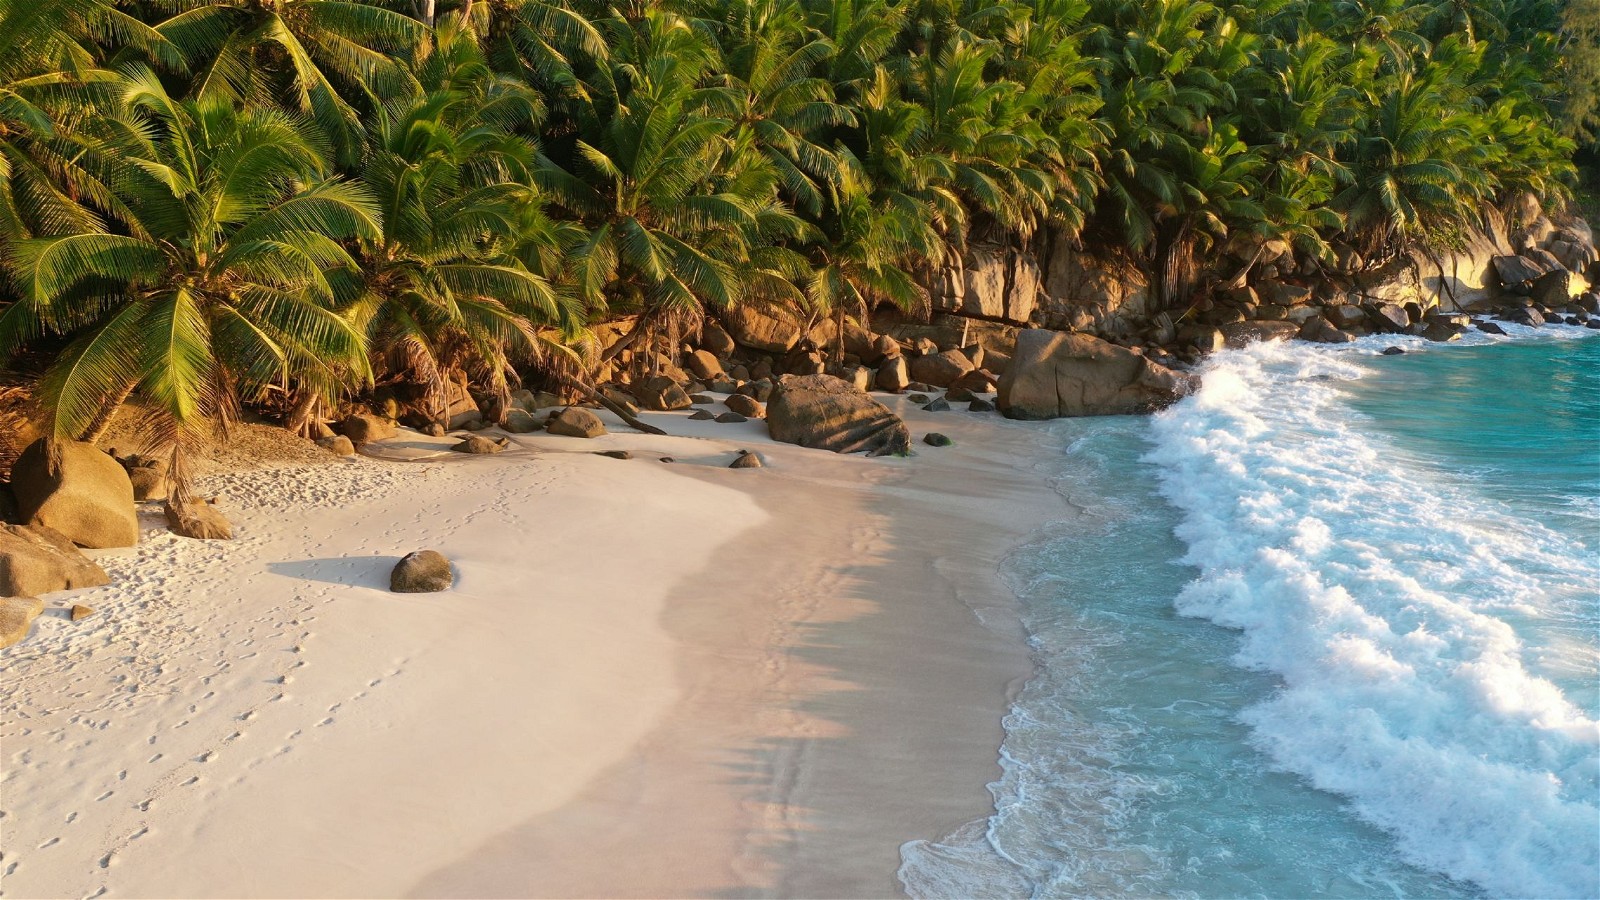 The Seychelles is an archipelago located in the Indian Ocean, and getting there requires a bit of planning. However, the effort is well worth it once you arrive in this paradise.